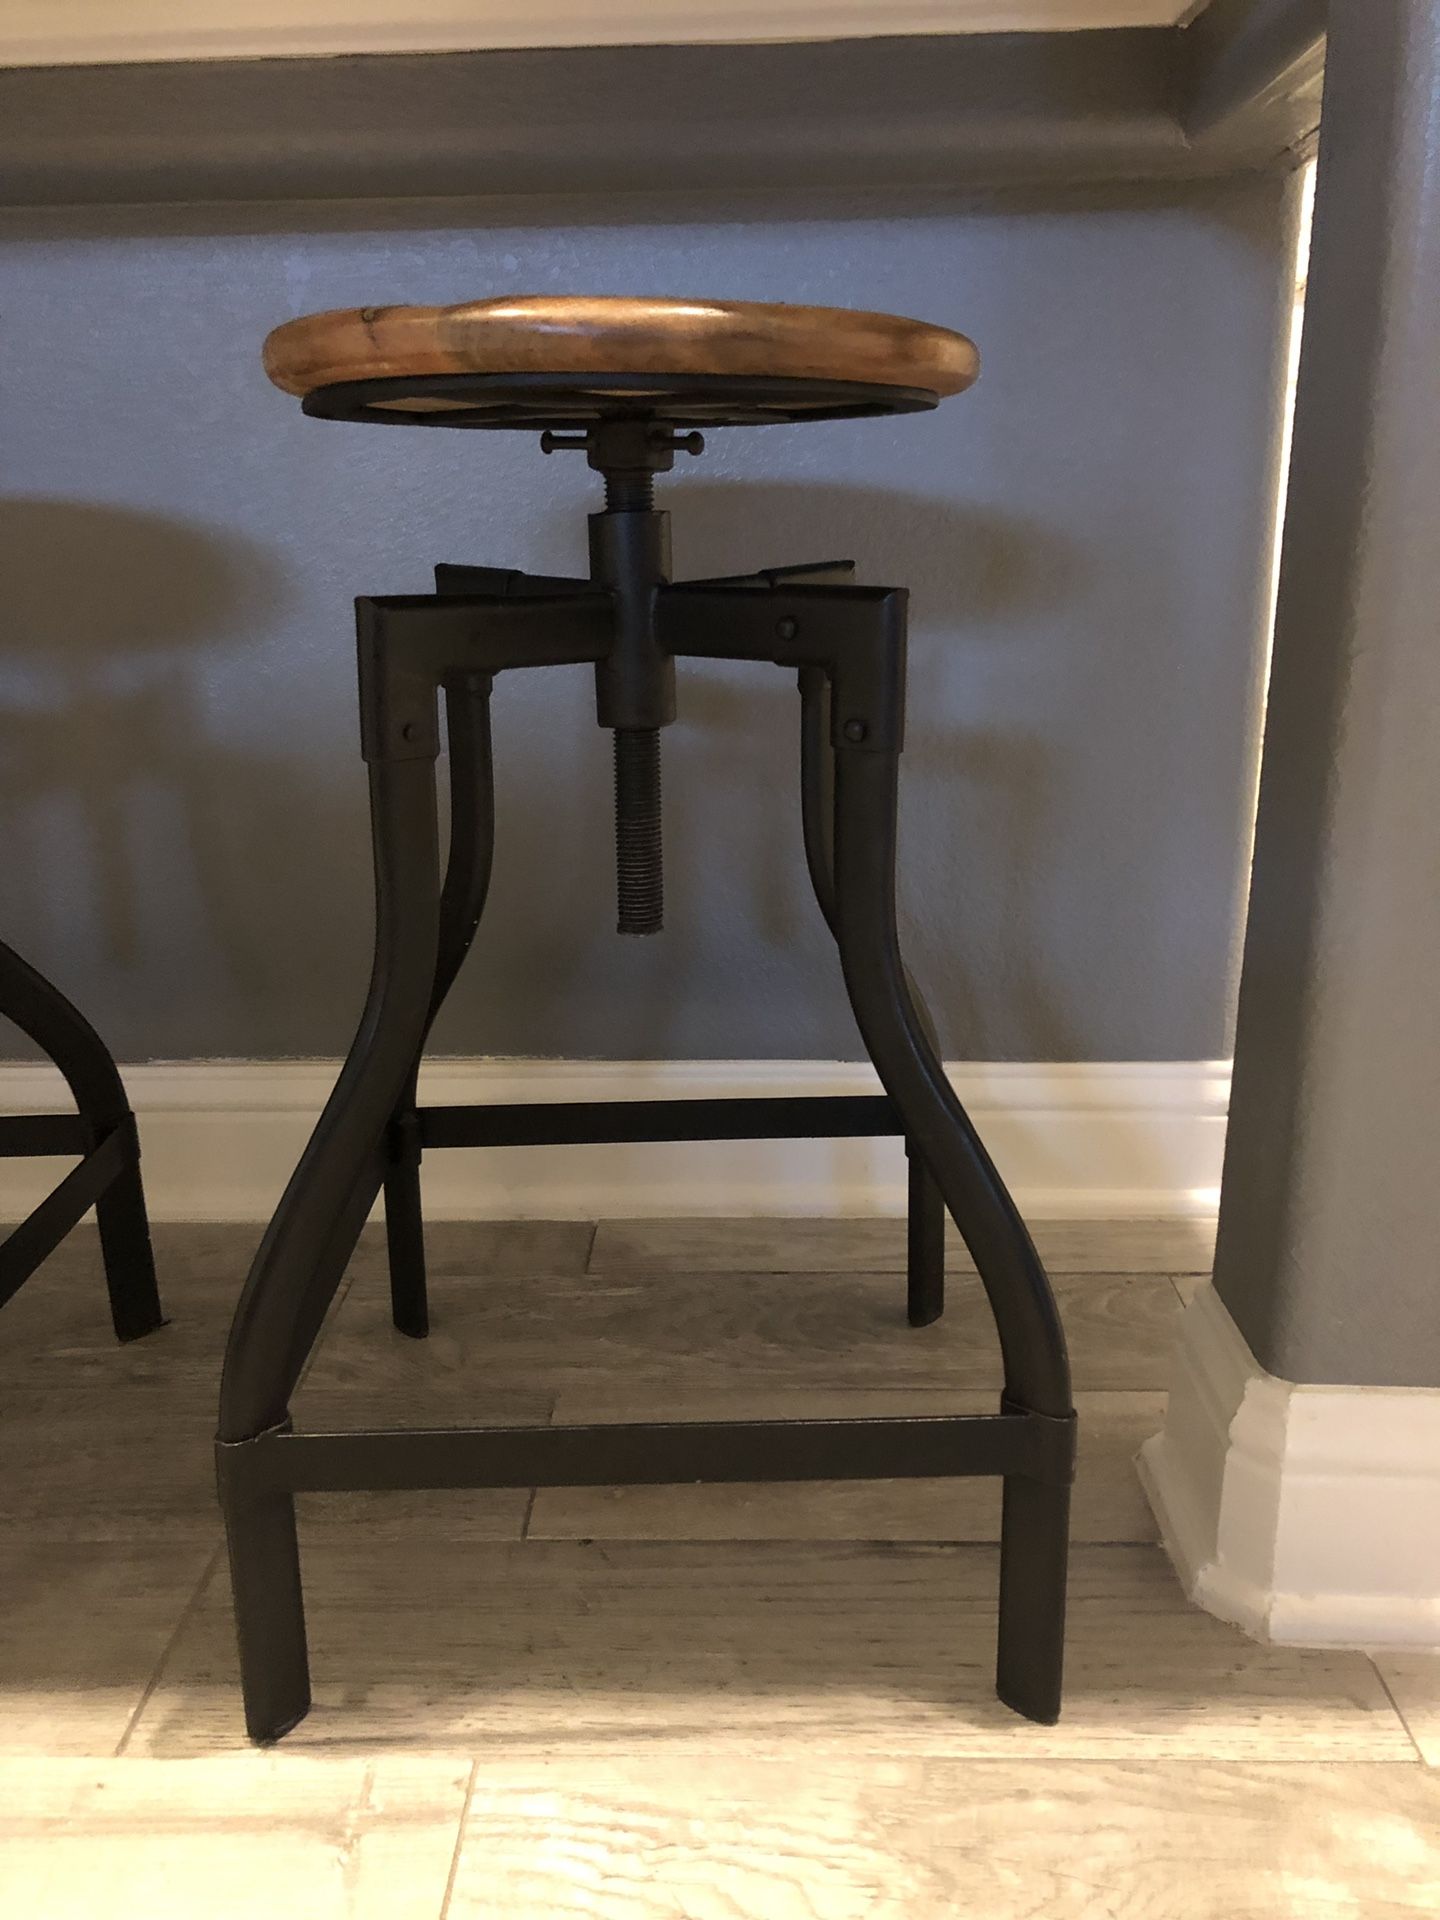 Metal and wooden counter stools